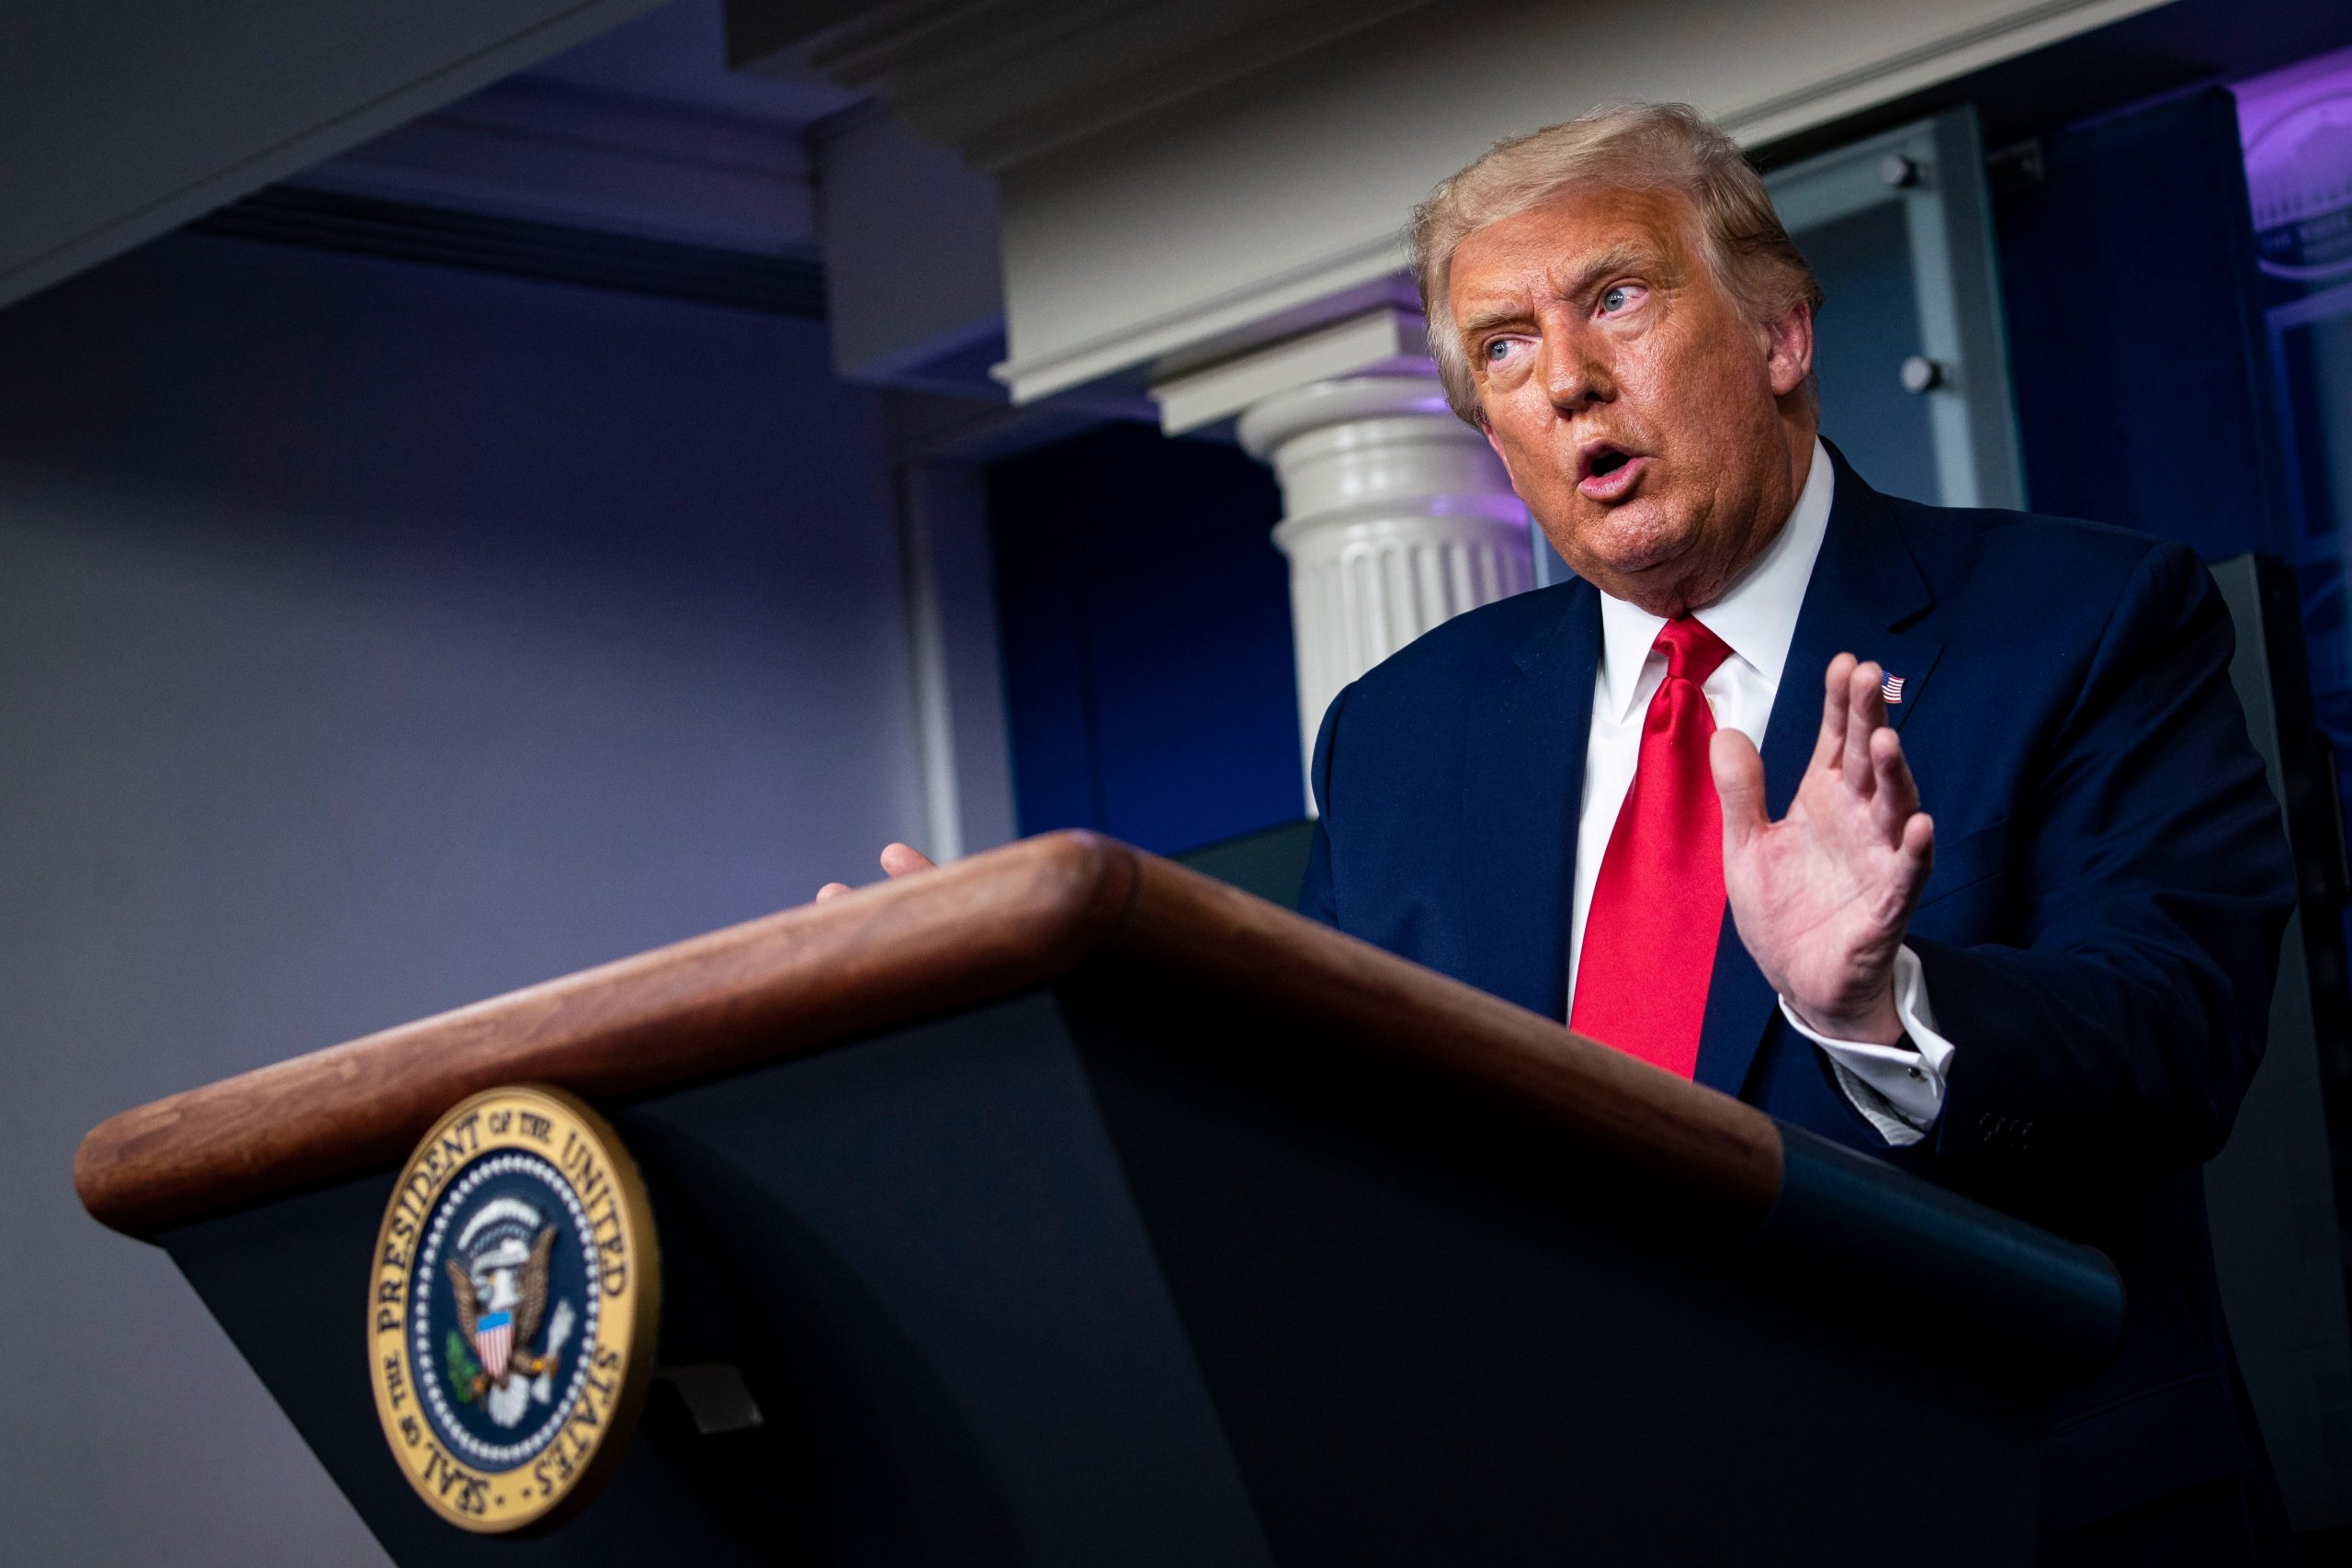 Trump News Live: Latest 2020 election updates as the President blames blue states for the coronavirus deaths